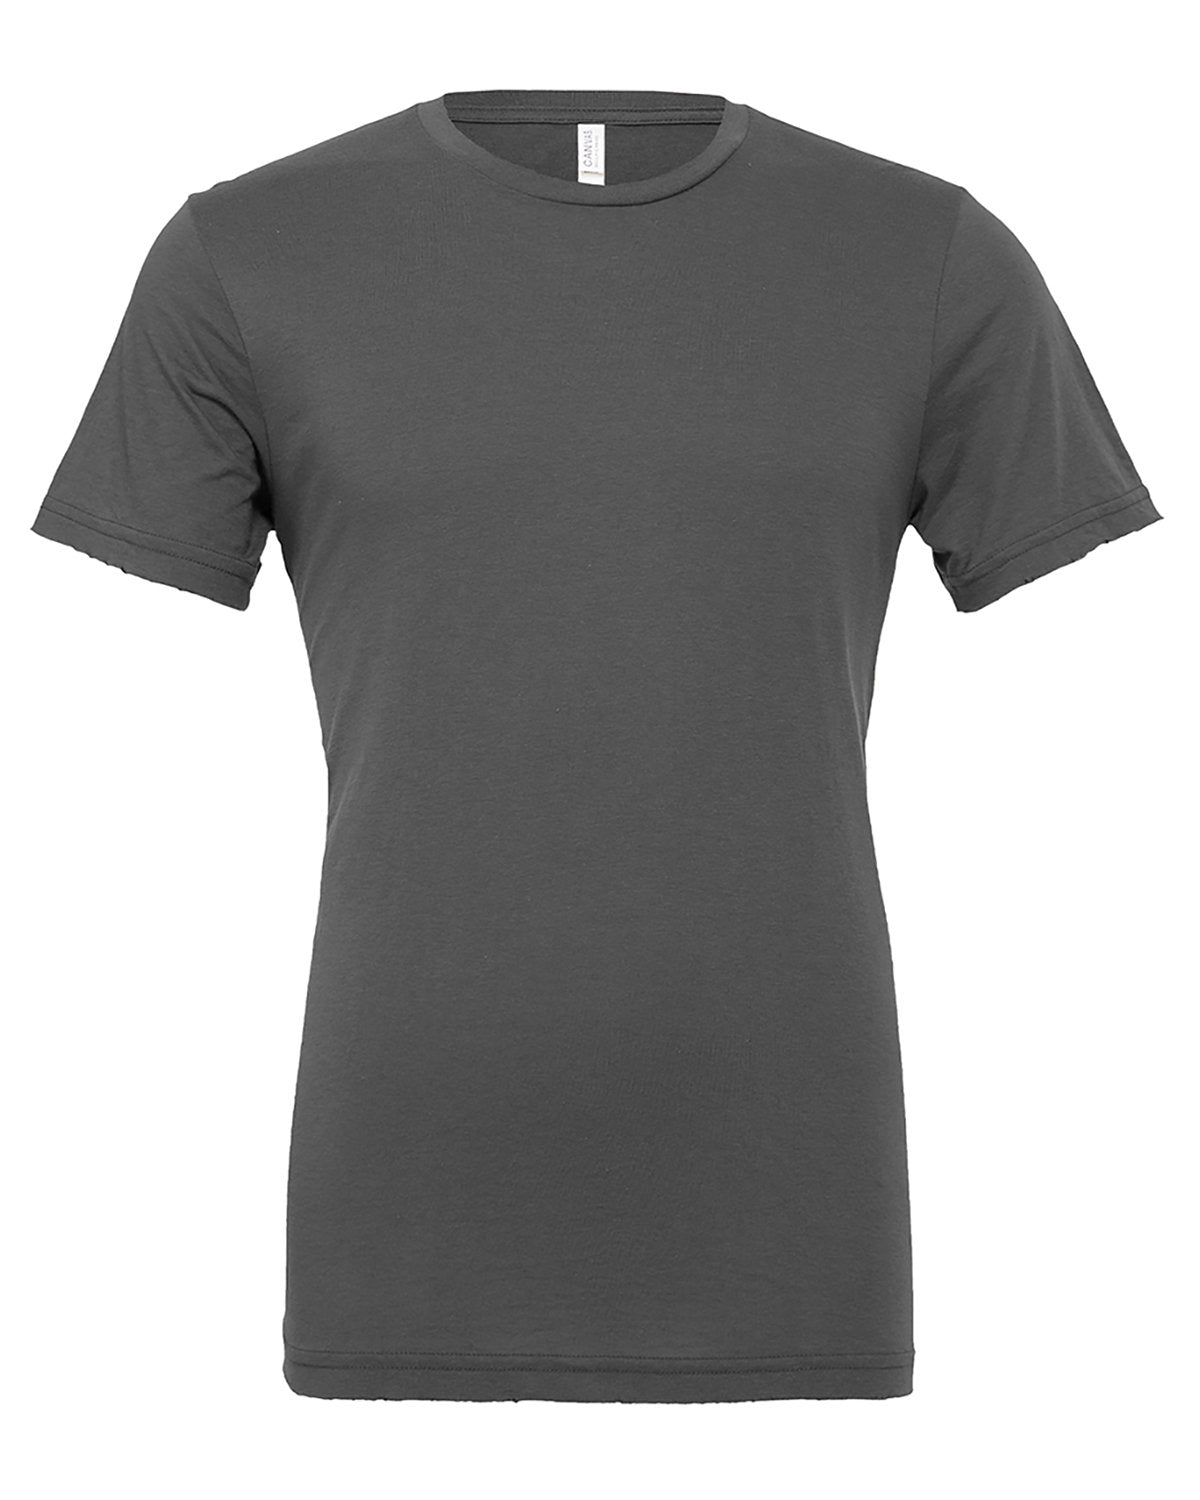 A plain dark gray Bella Canvas crew neck t-shirt with custom embroidery displayed on a neutral background with short sleeves and a visible white tag inside the collar by Show Off Your Threads.